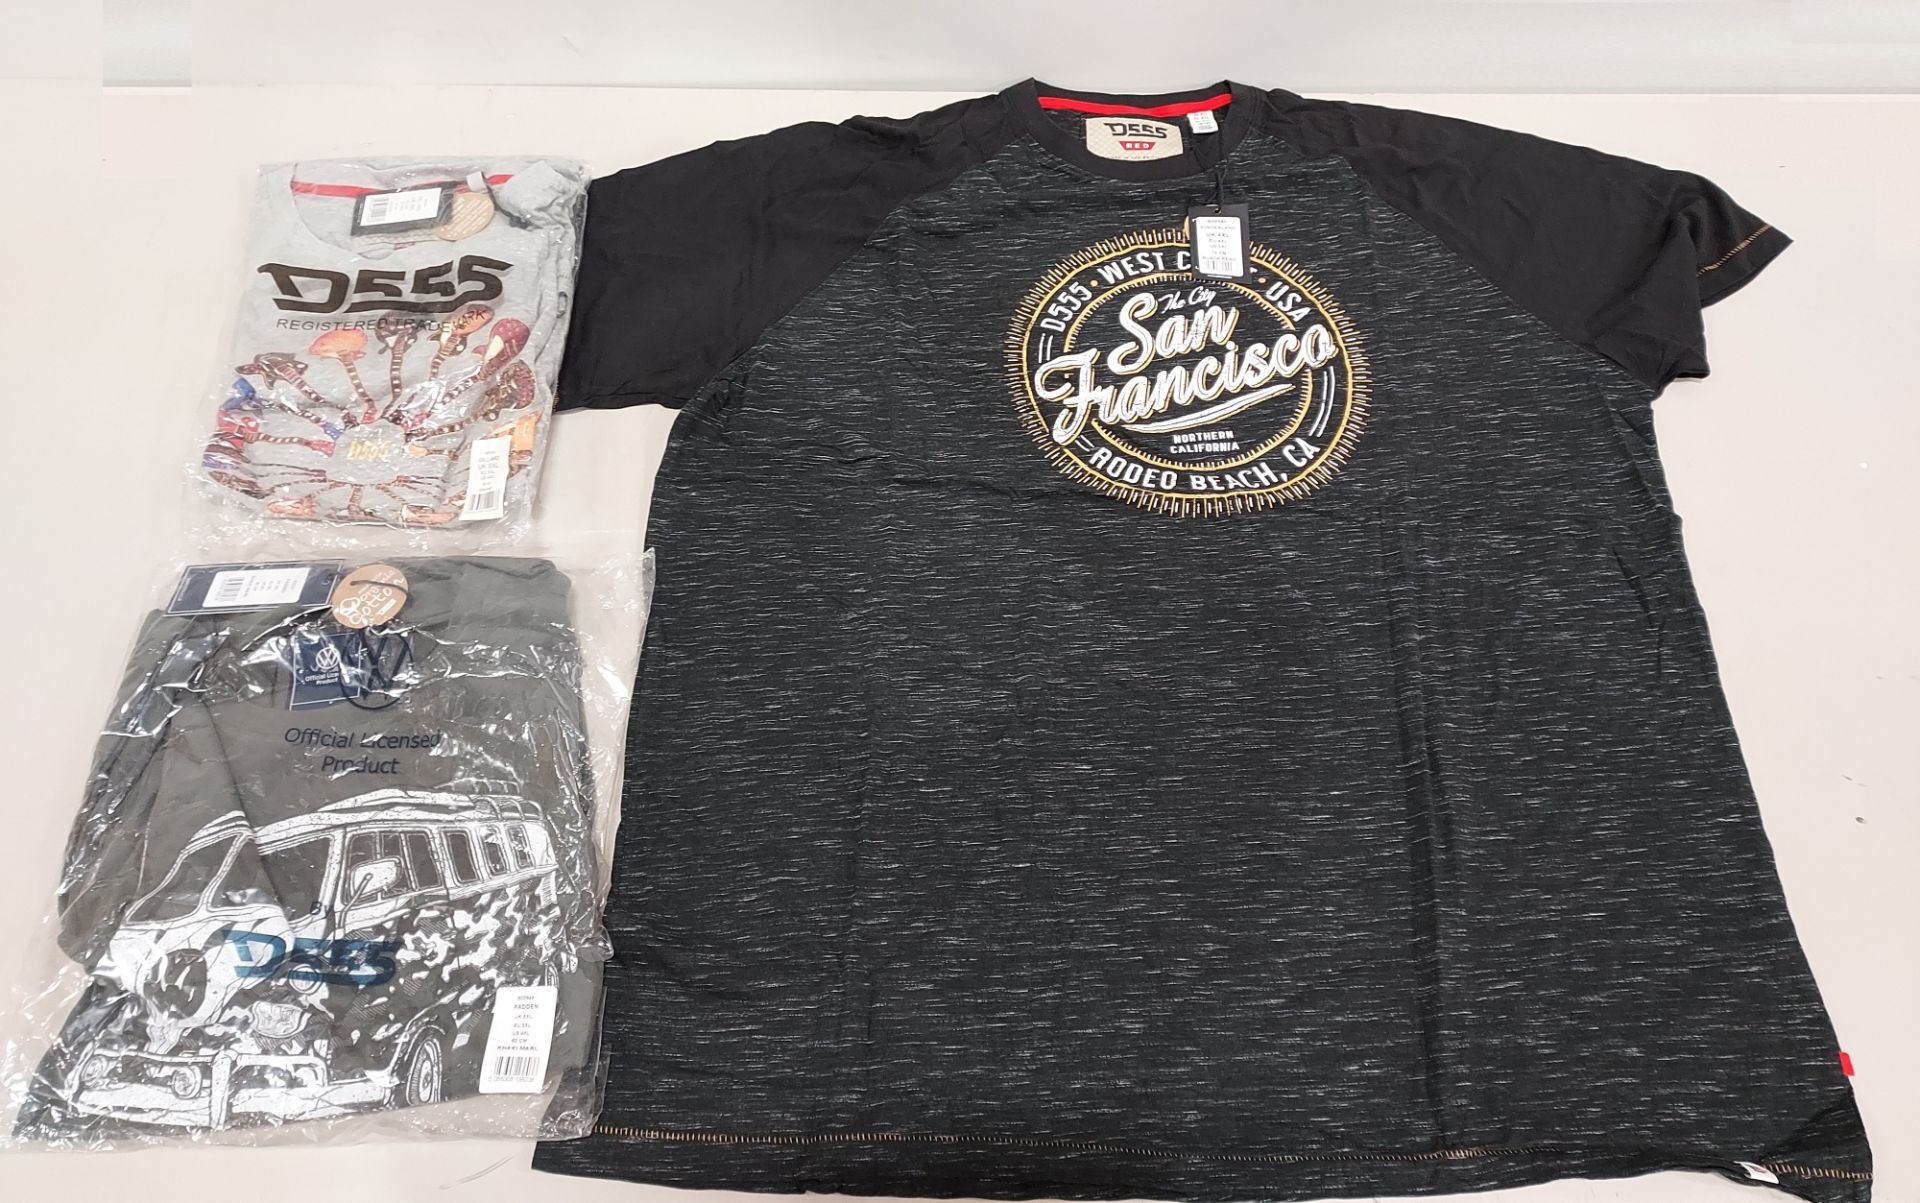 8 X BRAND NEW D555 MIXED T SHIRTS SIZES 4 SIZE 5XL , 2 SIZE 6XL , 2 SIZE 4XL IN GREY AND BLACK